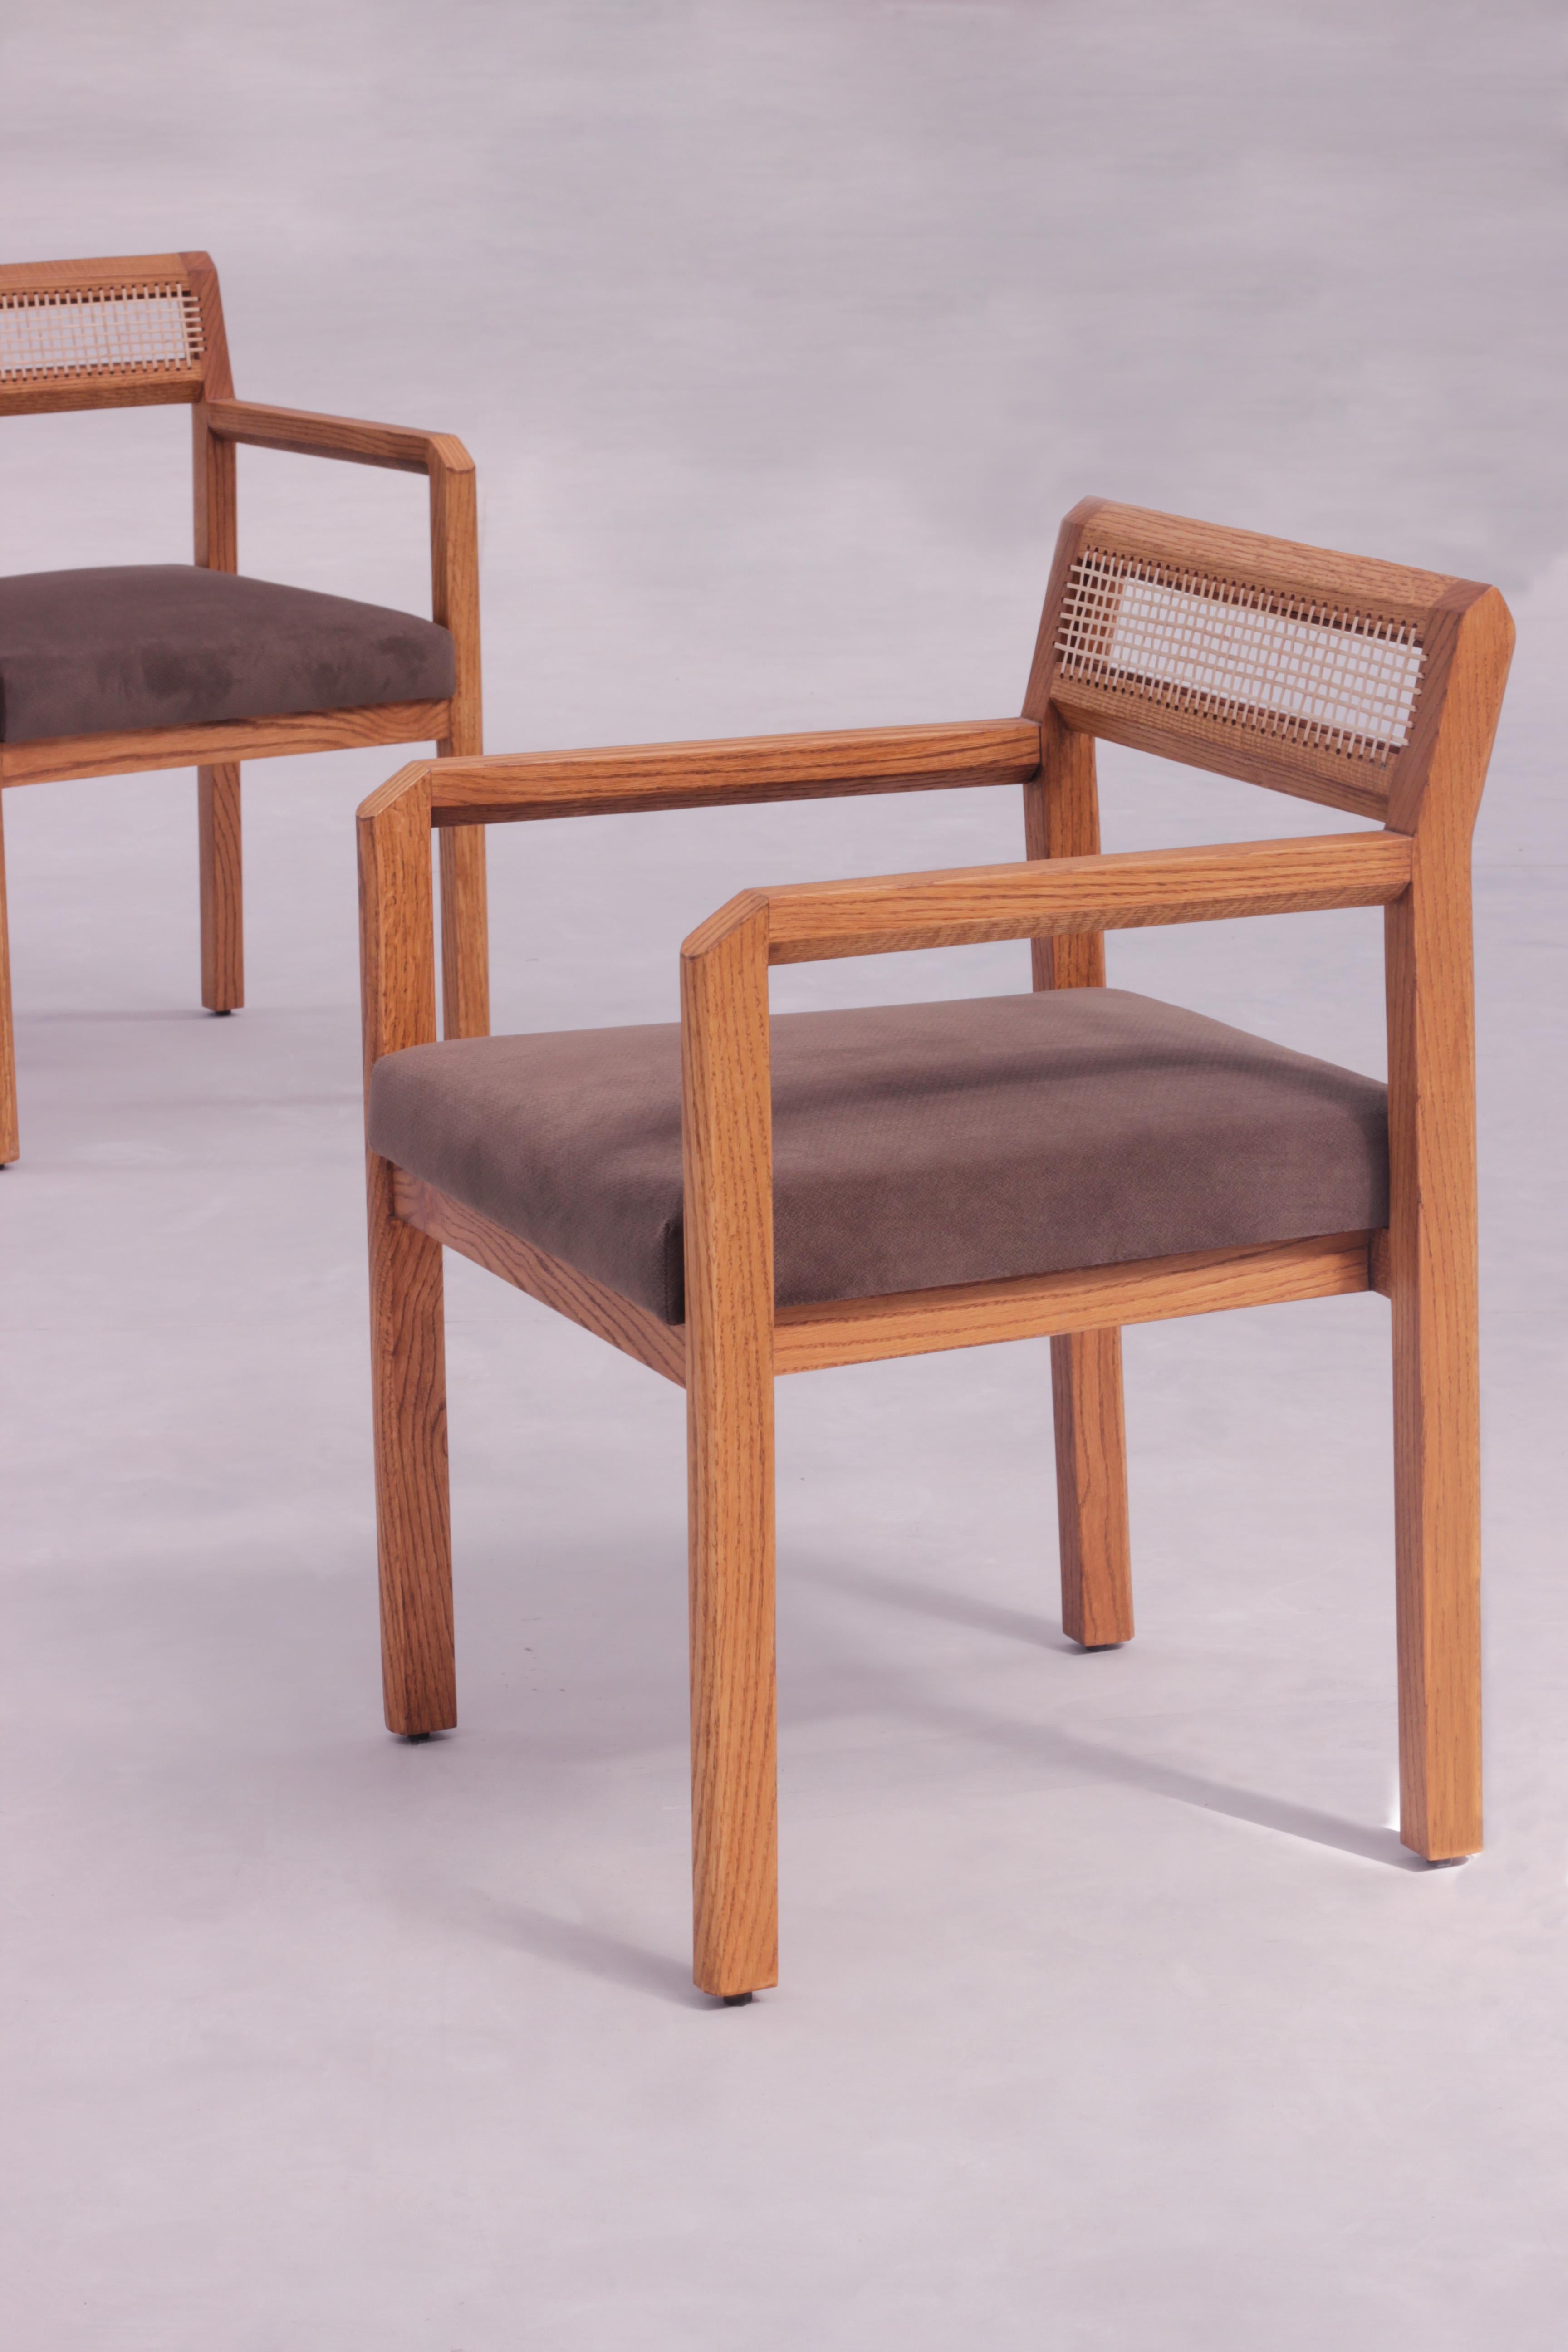 The Jalore chair is a stunning piece of furniture that is perfect for any modern home. Made from solid oak wood, this chair features a handcrafted tactile backrest with handwoven cane details that is both stylish and functional. The Jalore chair is